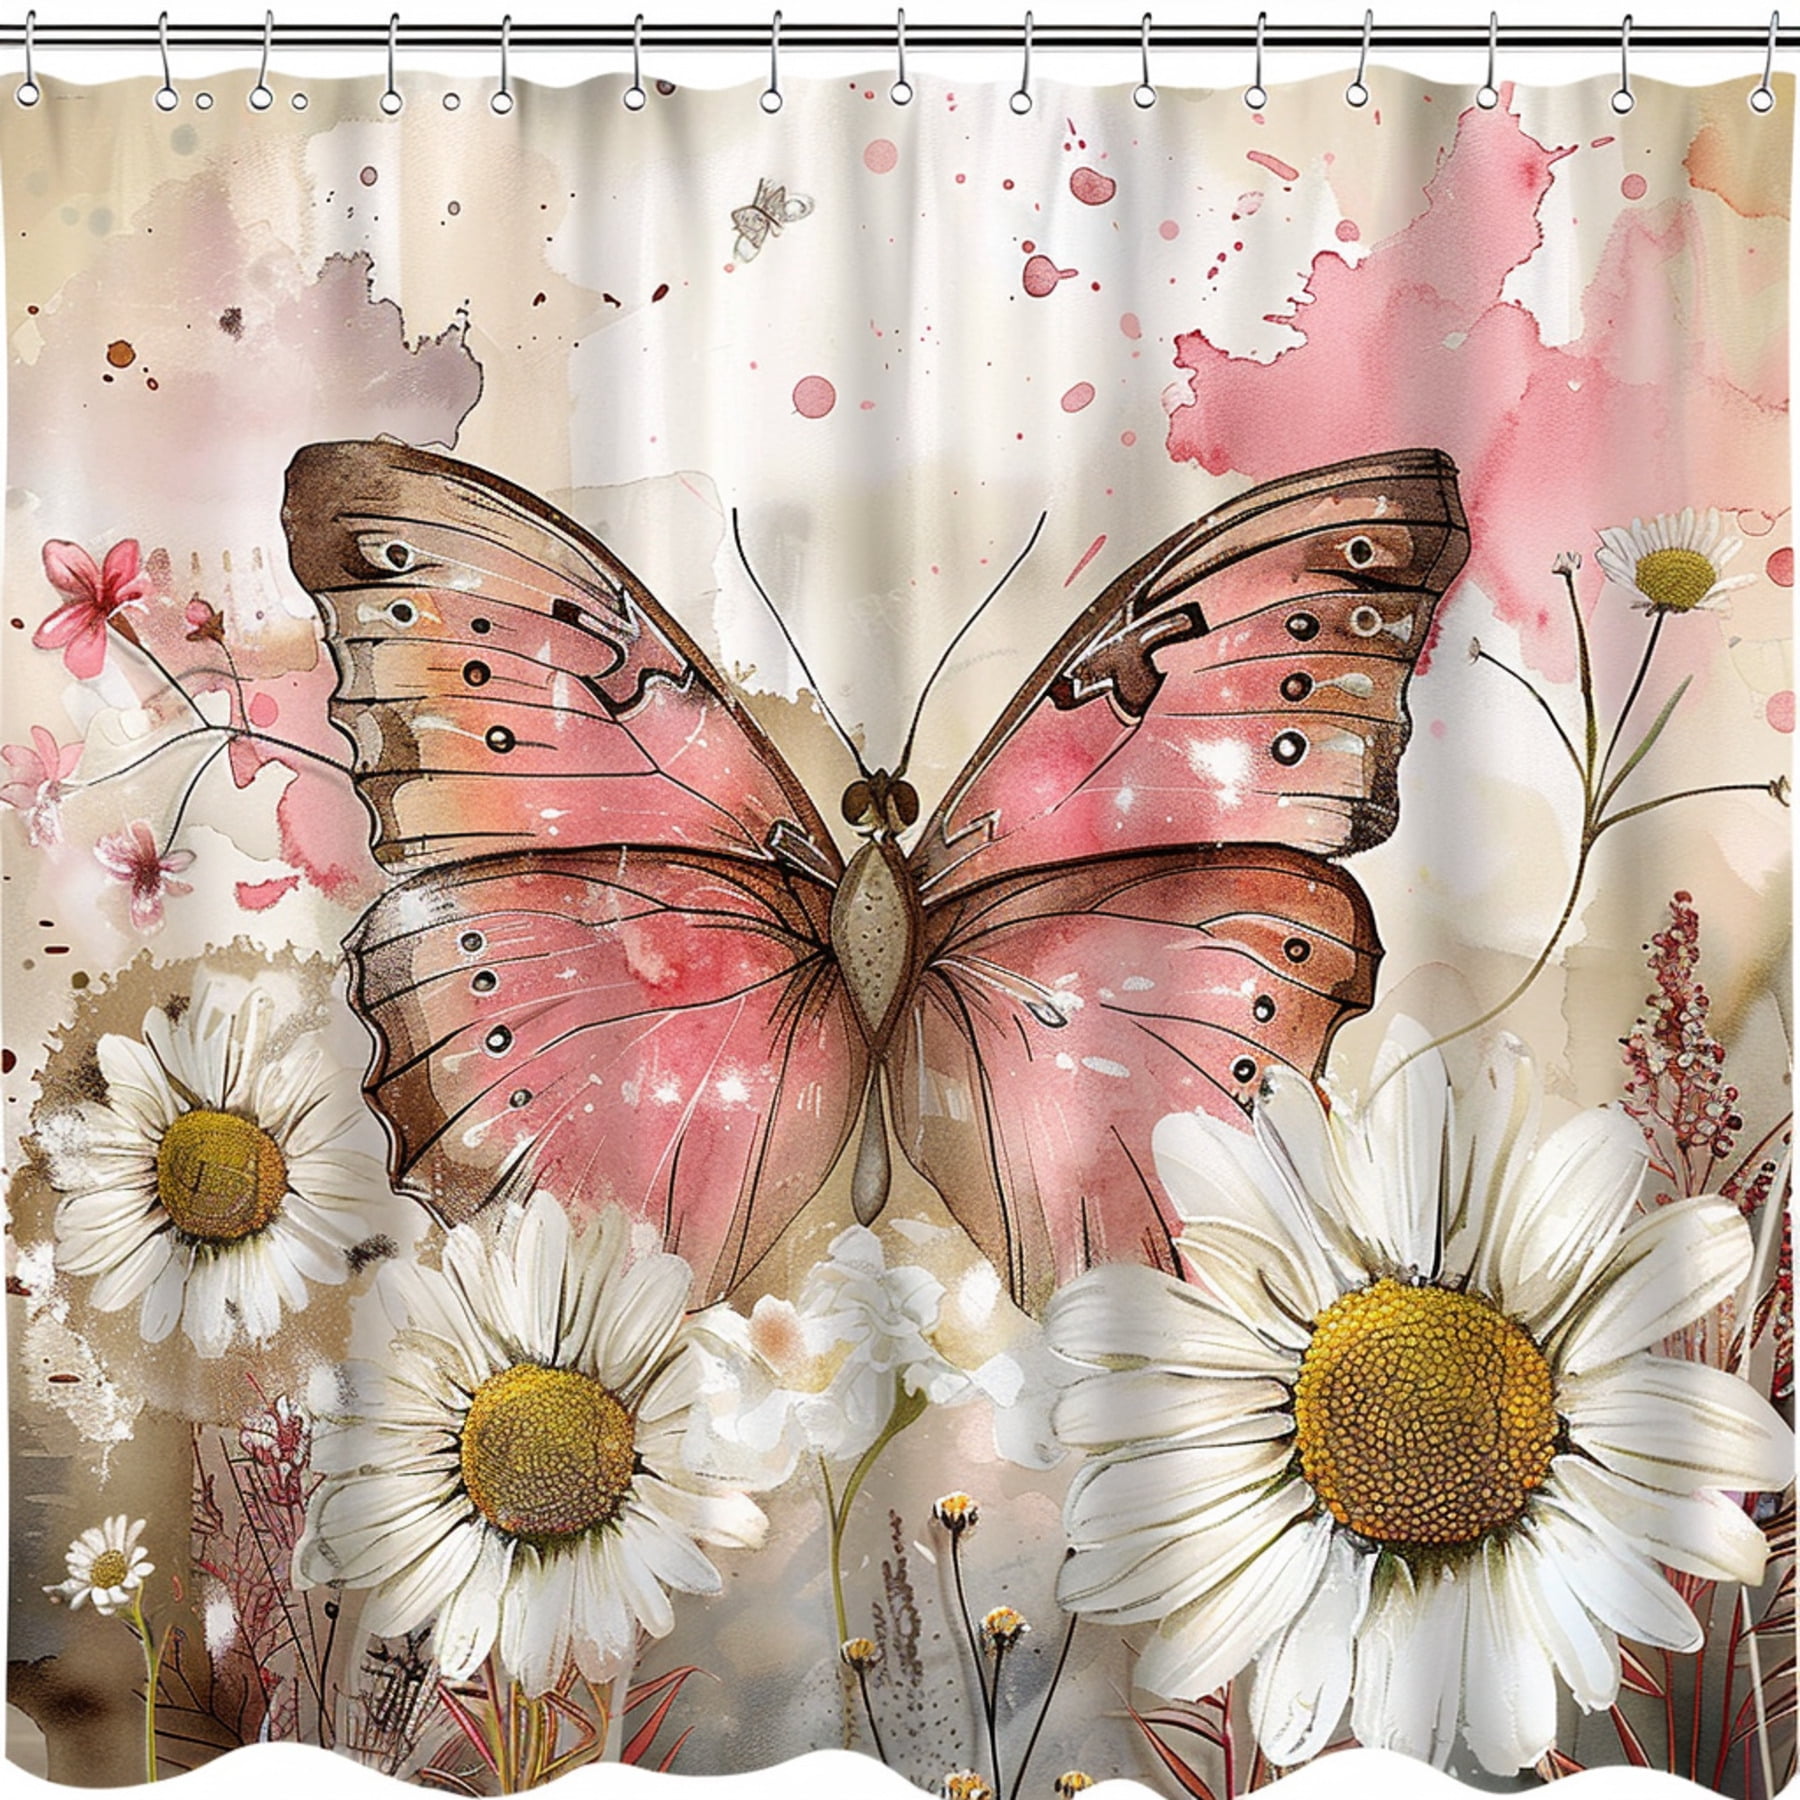 Vintage Watercolor Butterfly and Daisies Shower Curtain in Pink Brown ...